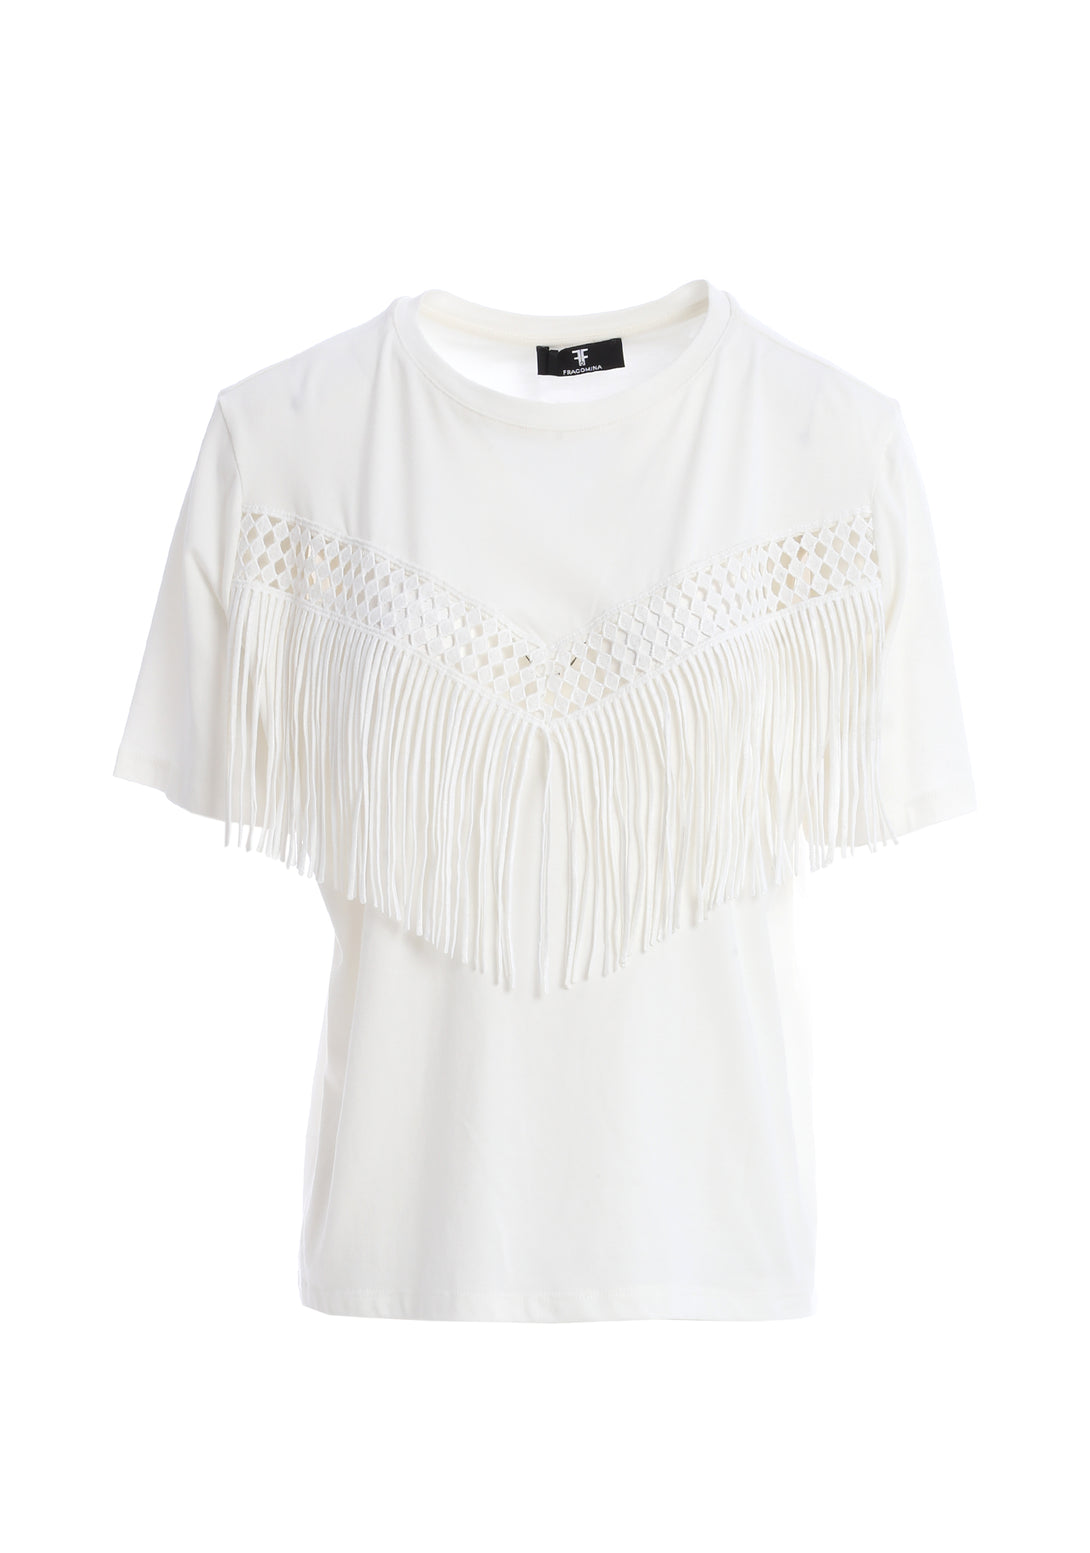 T-shirt over fit made in jersey with fringes on the front